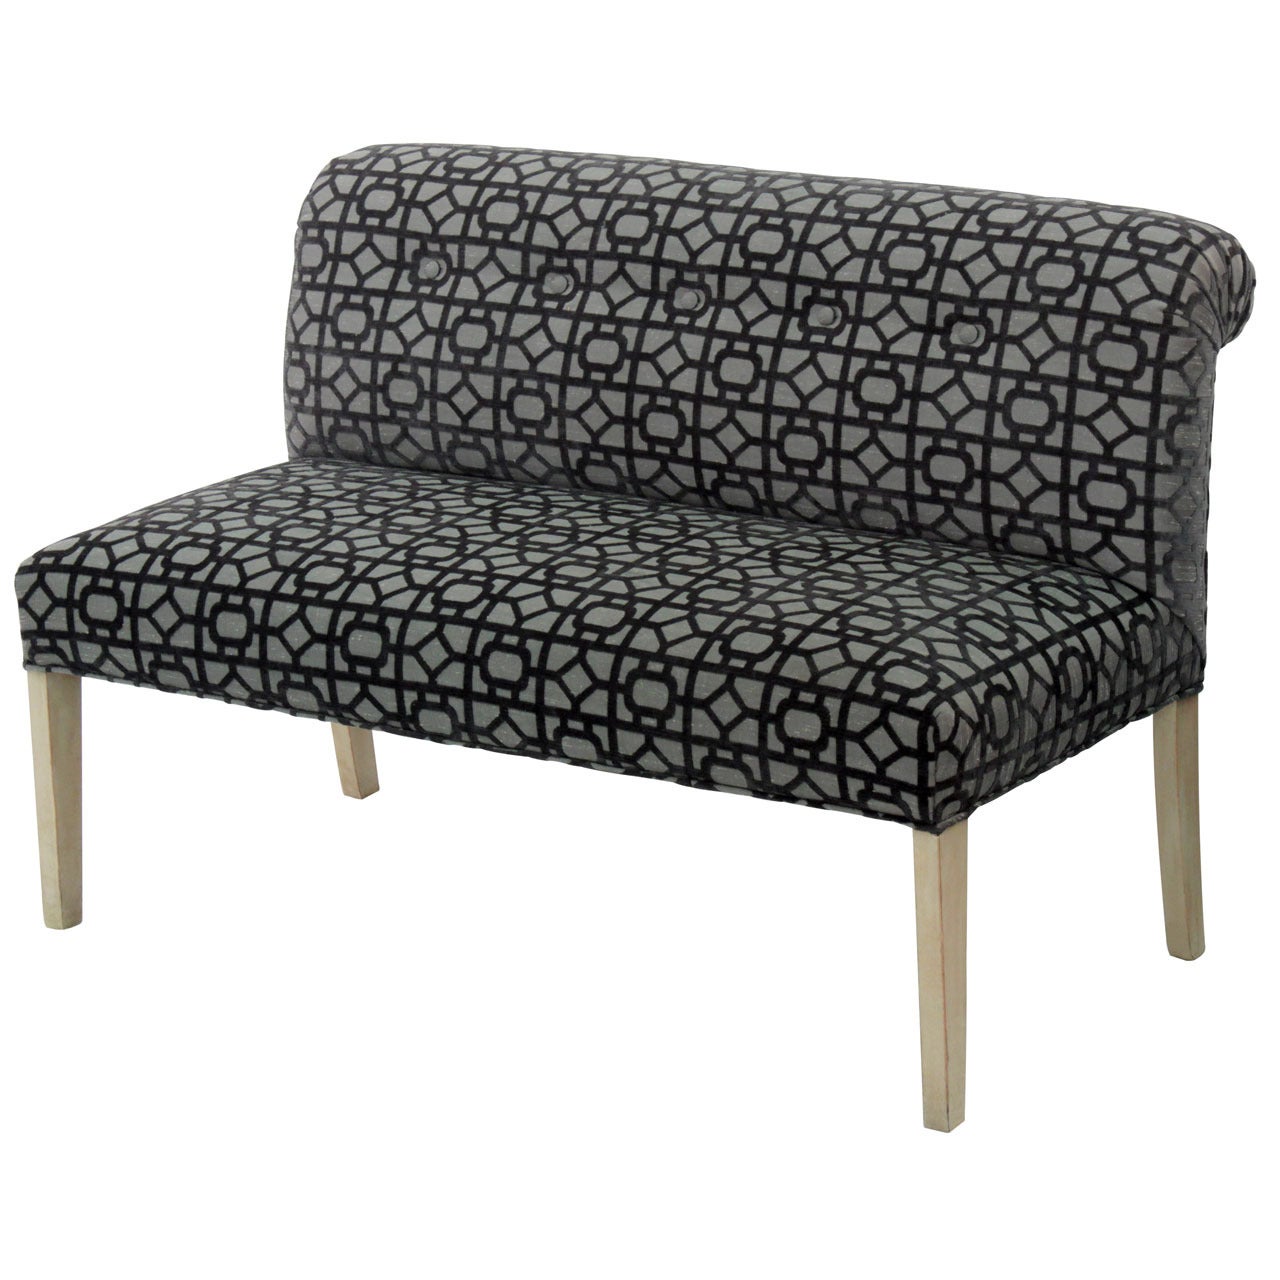 Rolled Top Bench in Chic Patterned Fabric